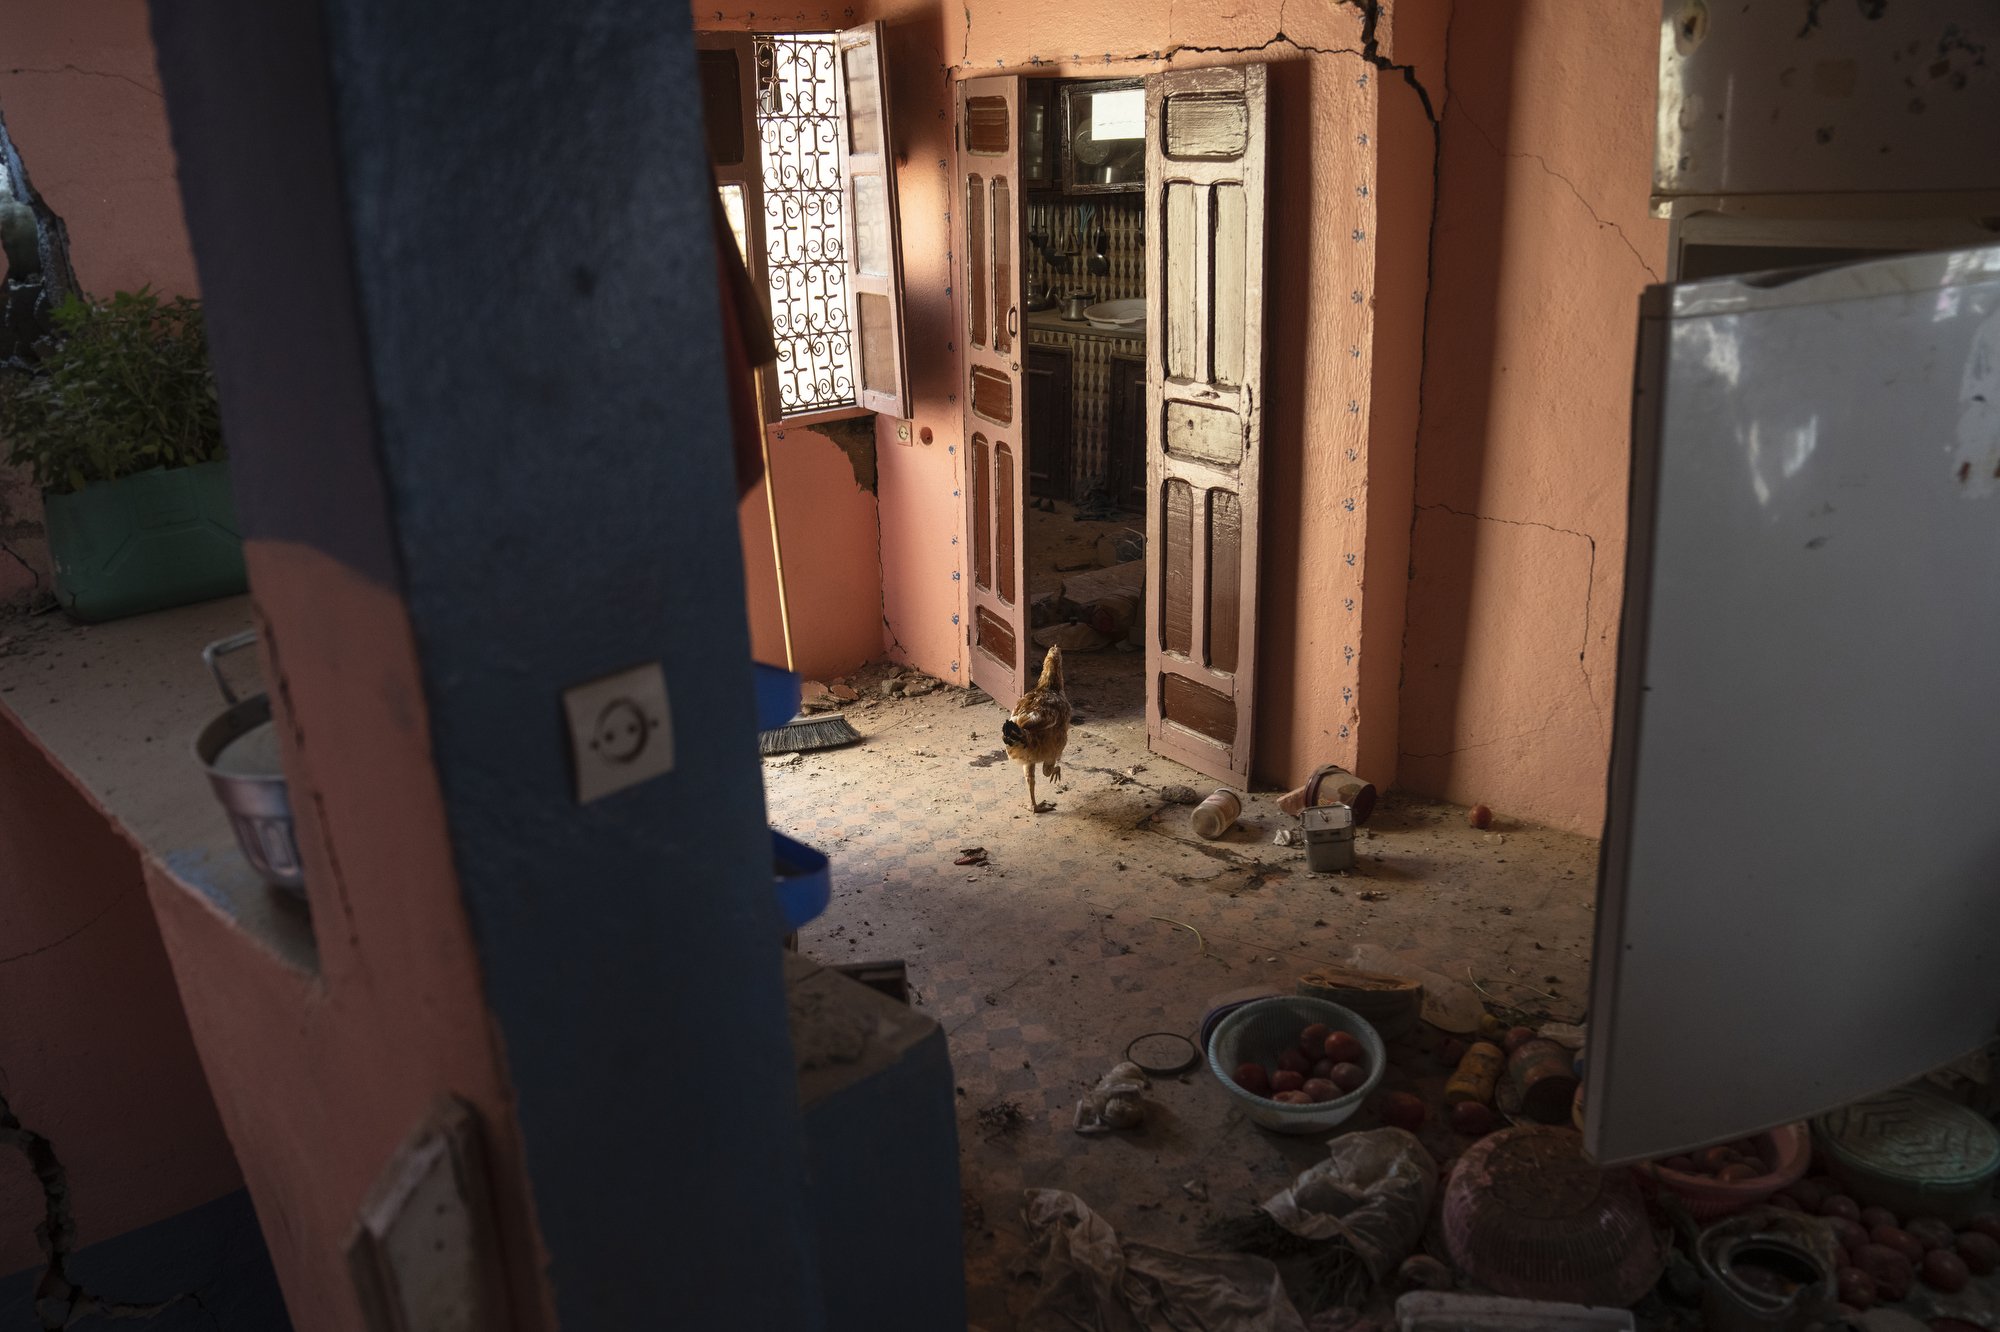  A chicken grazes inside a home that was damaged by an earthquake in the town of Imi N’tala, outside Marrakech, Morocco, on Sept. 12, 2023. (AP Photo/Mosa’ab Elshamy) 